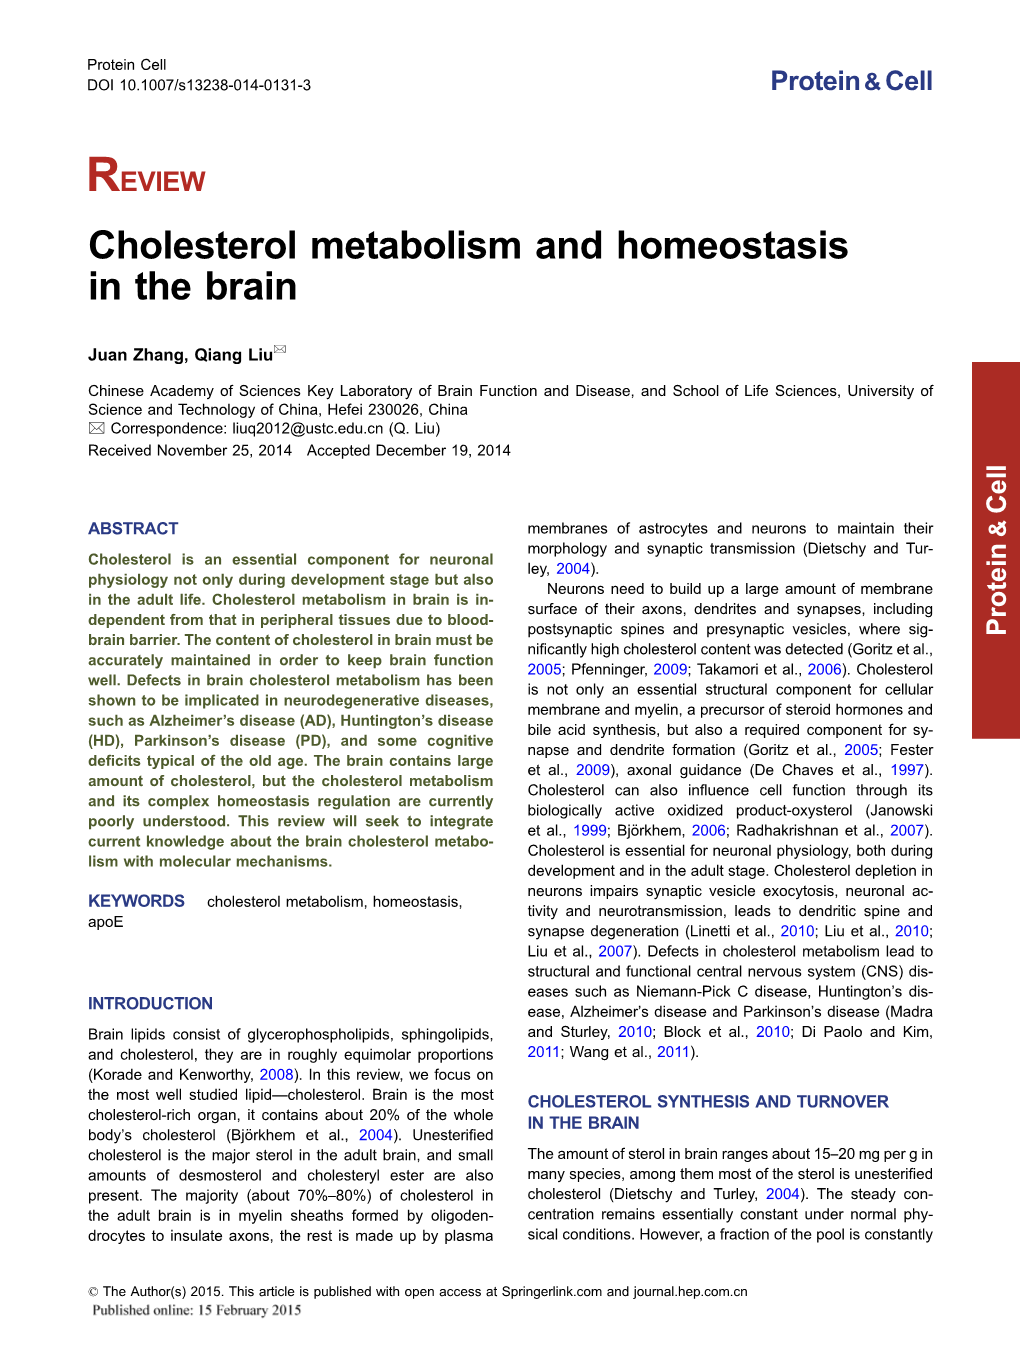 Cholesterol Metabolism and Homeostasis in the Brain